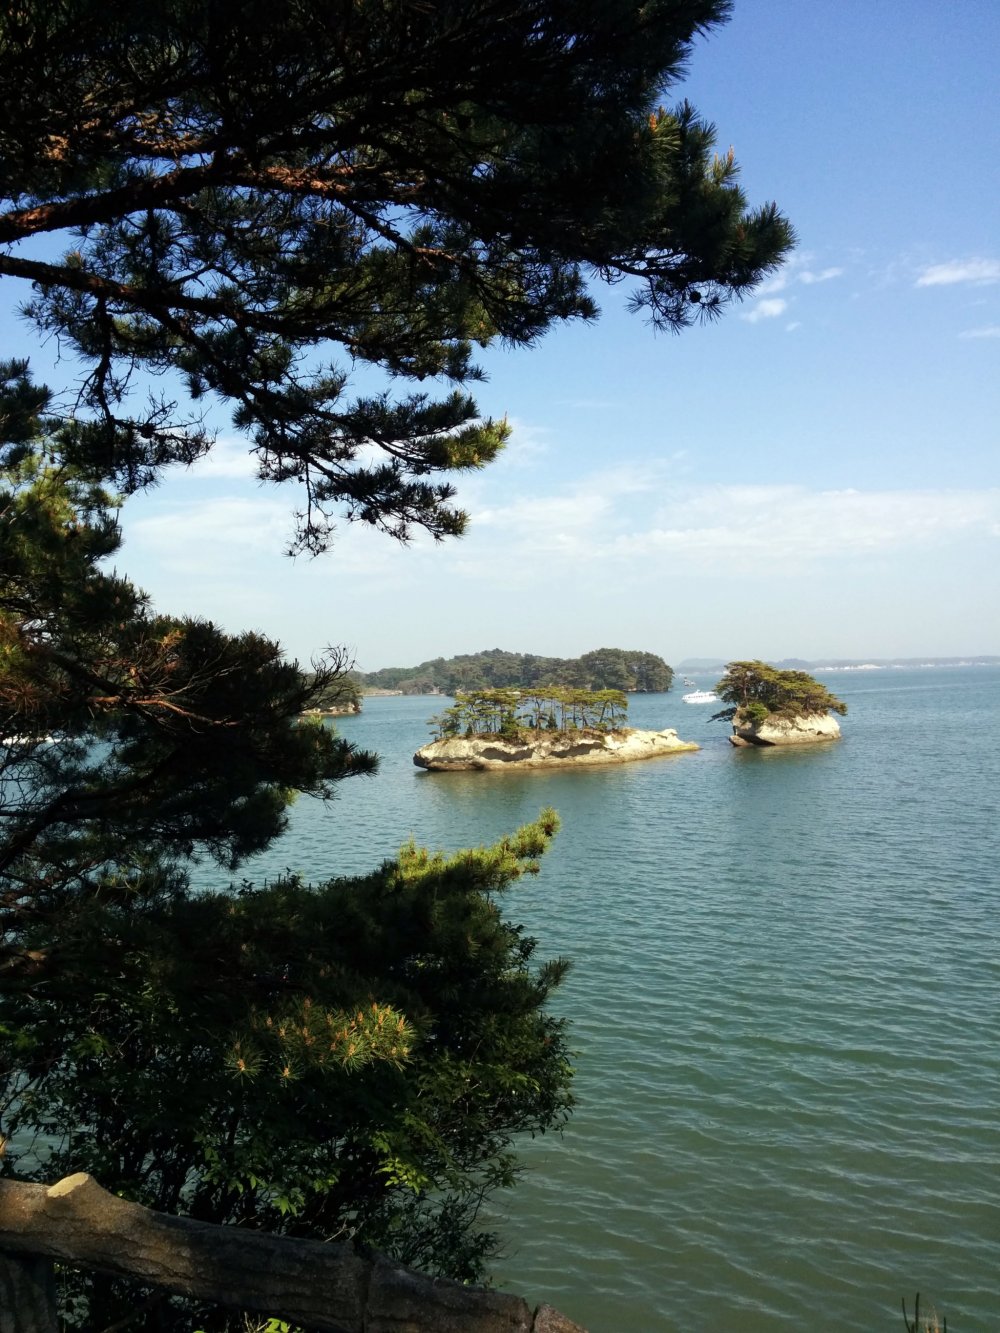 Oshima Island offers great views of the bay with some of the pine covered islands which Matsushima is famous for